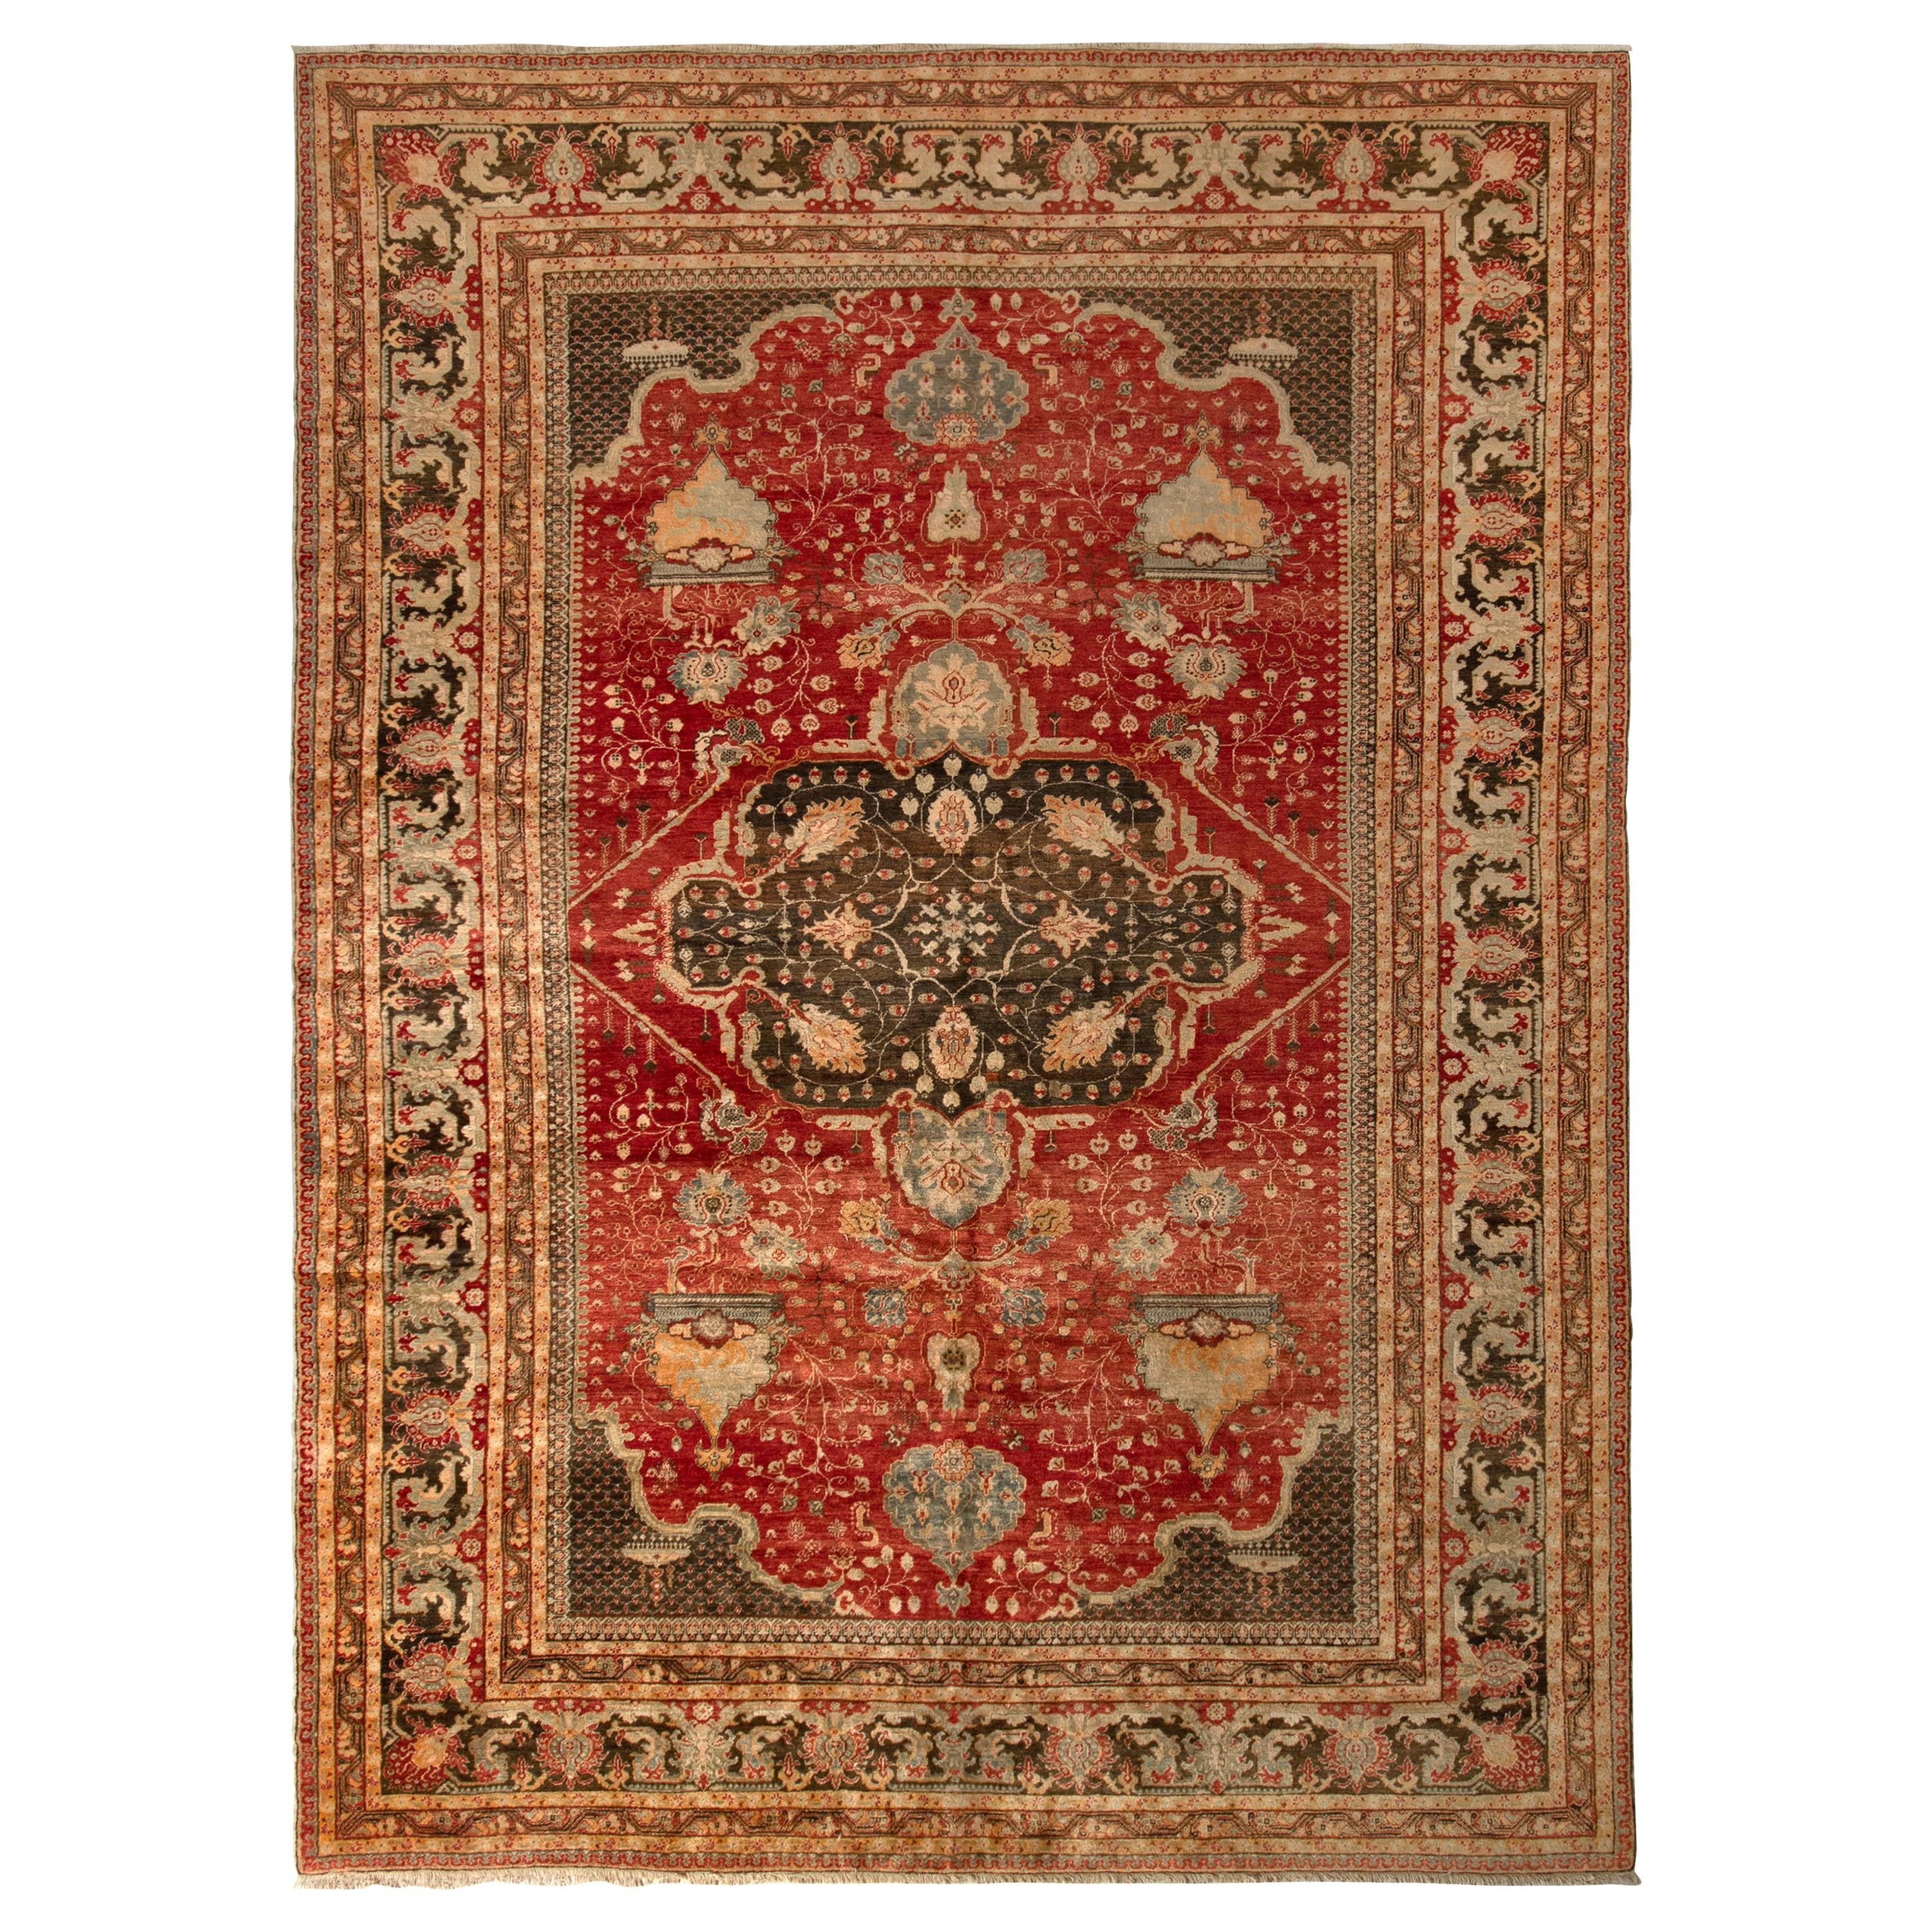 Hand Knotted Antique Oushak Rug in Orange Beige Geometric Pattern